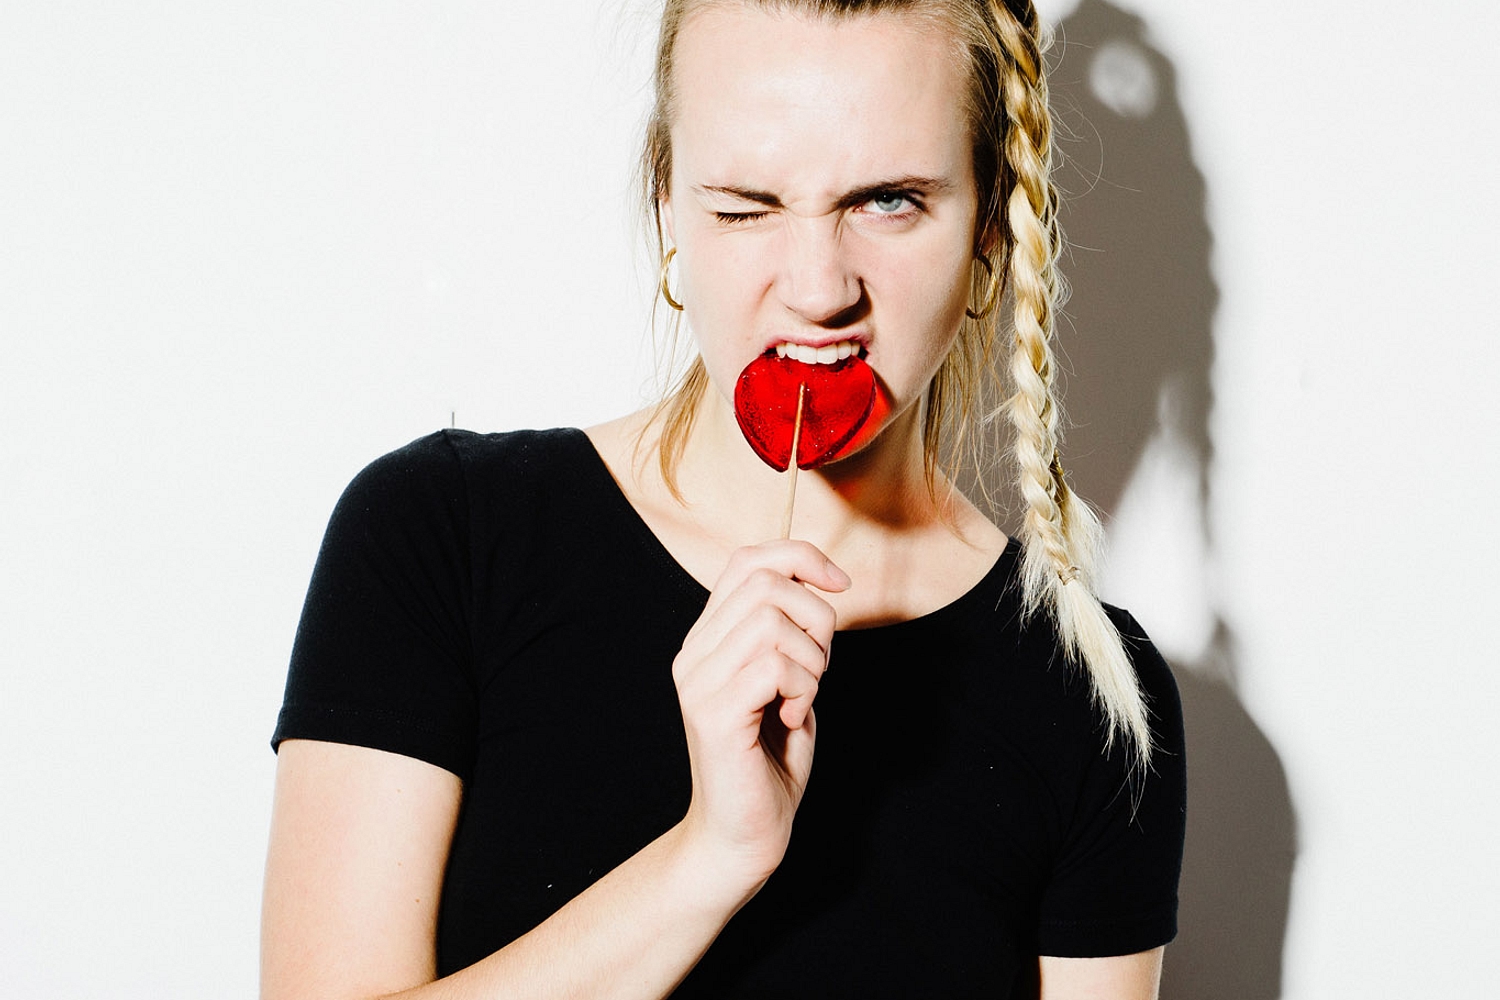 MØ to perform at Nobel Peace Prize Concert